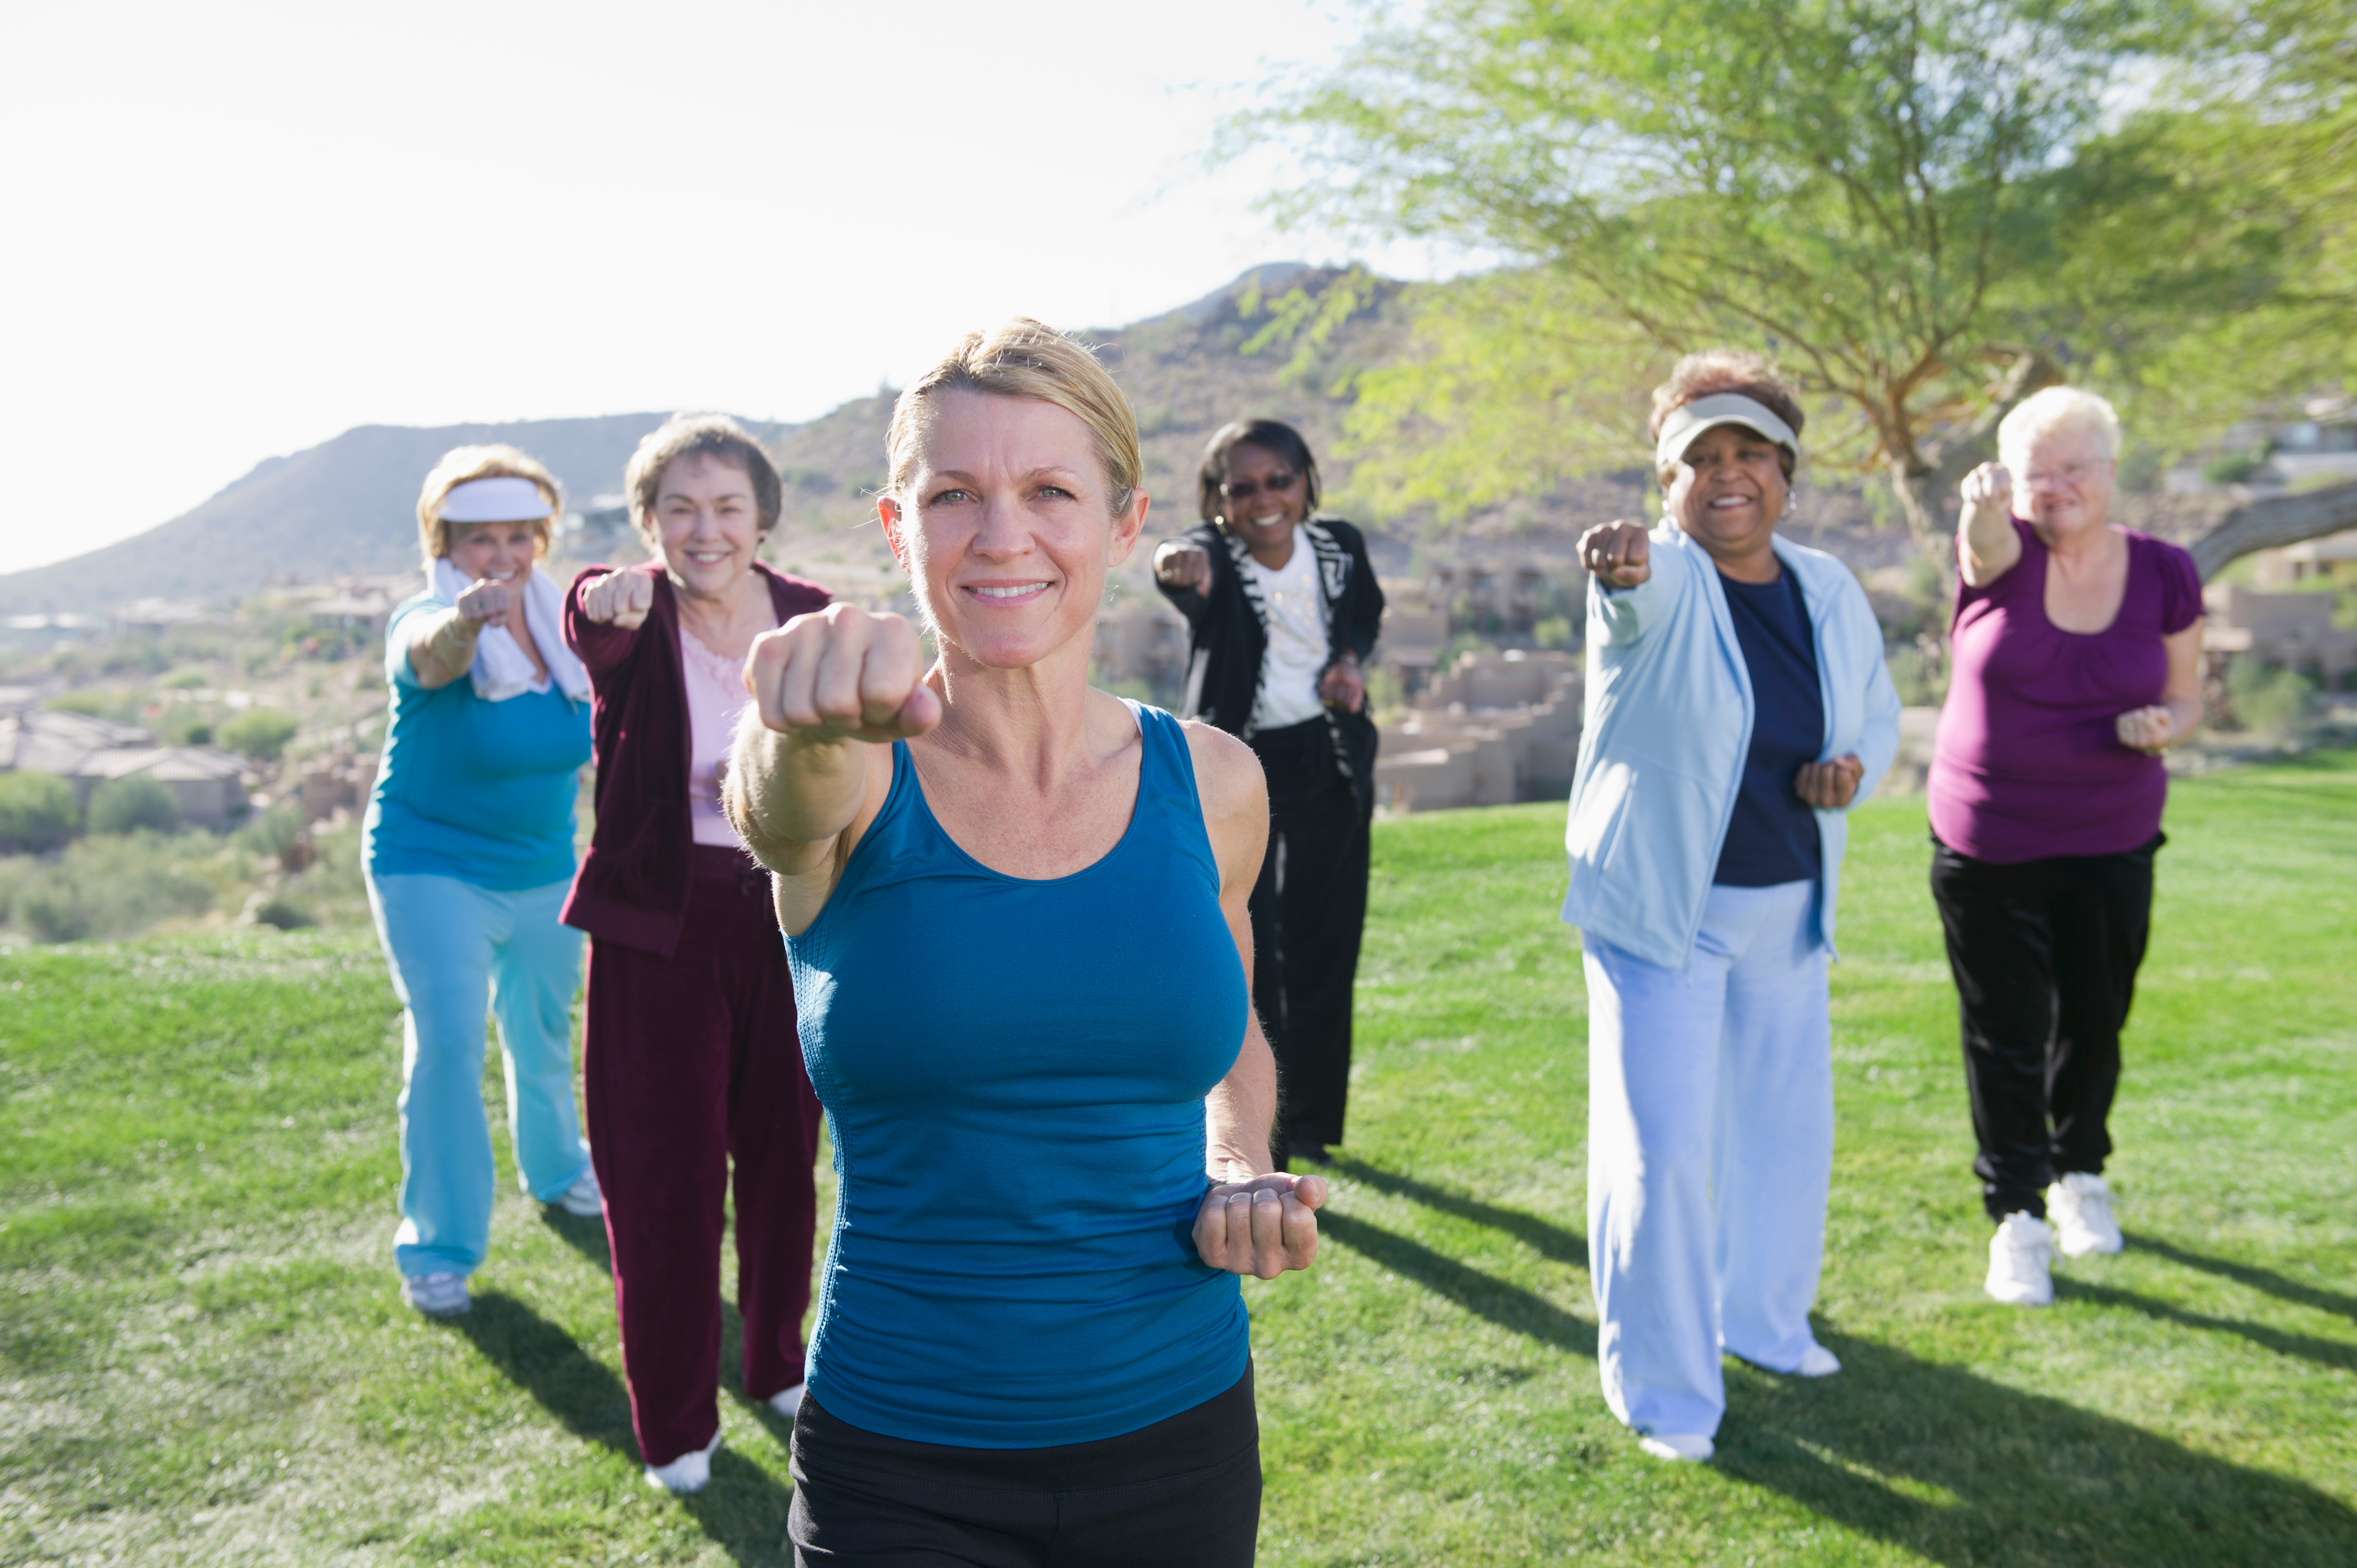 Women taking exercise class outdoors